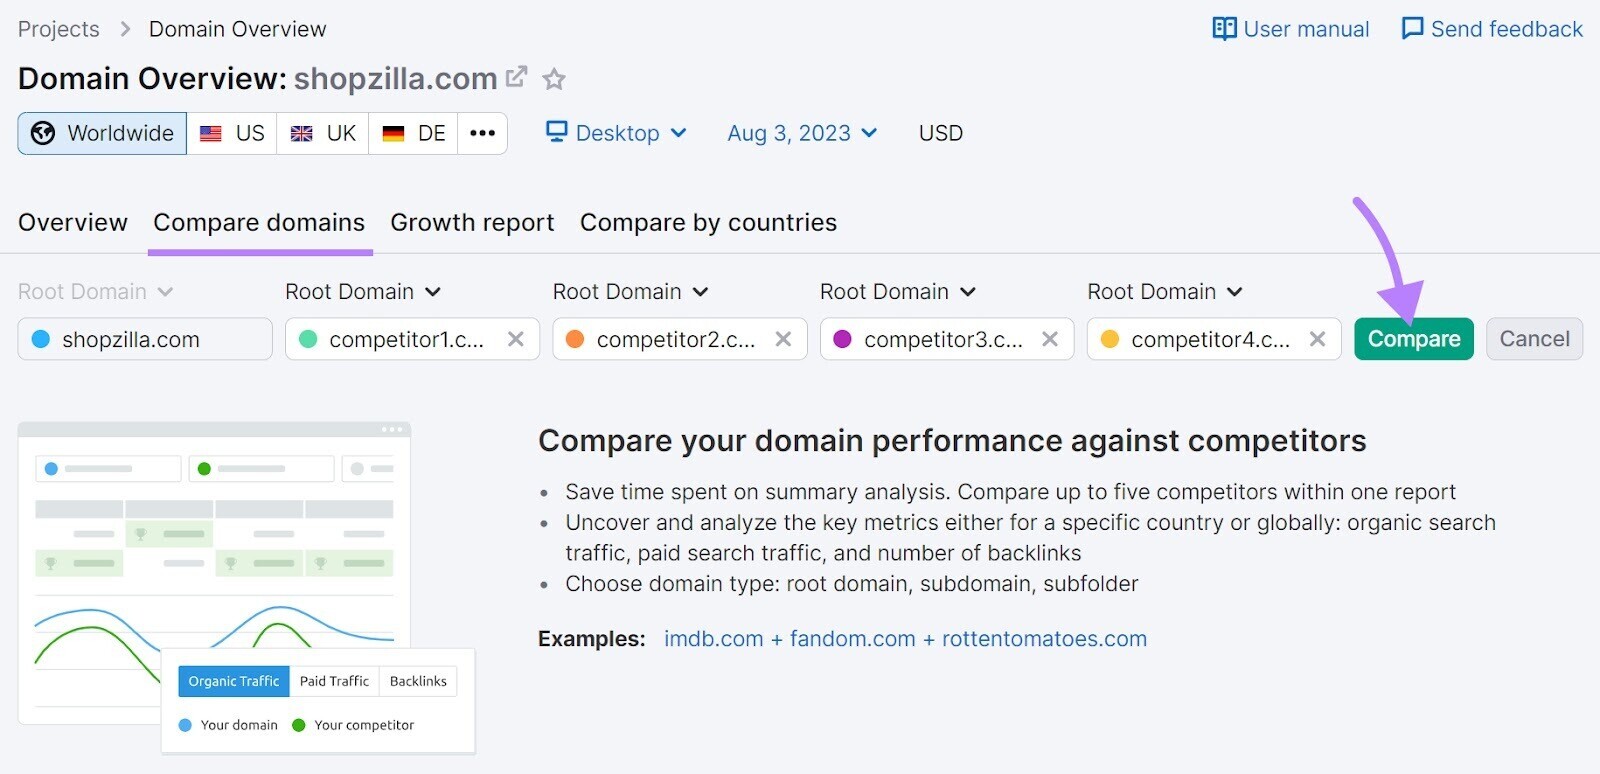 “Compare domains” tab in Domain Overview tool